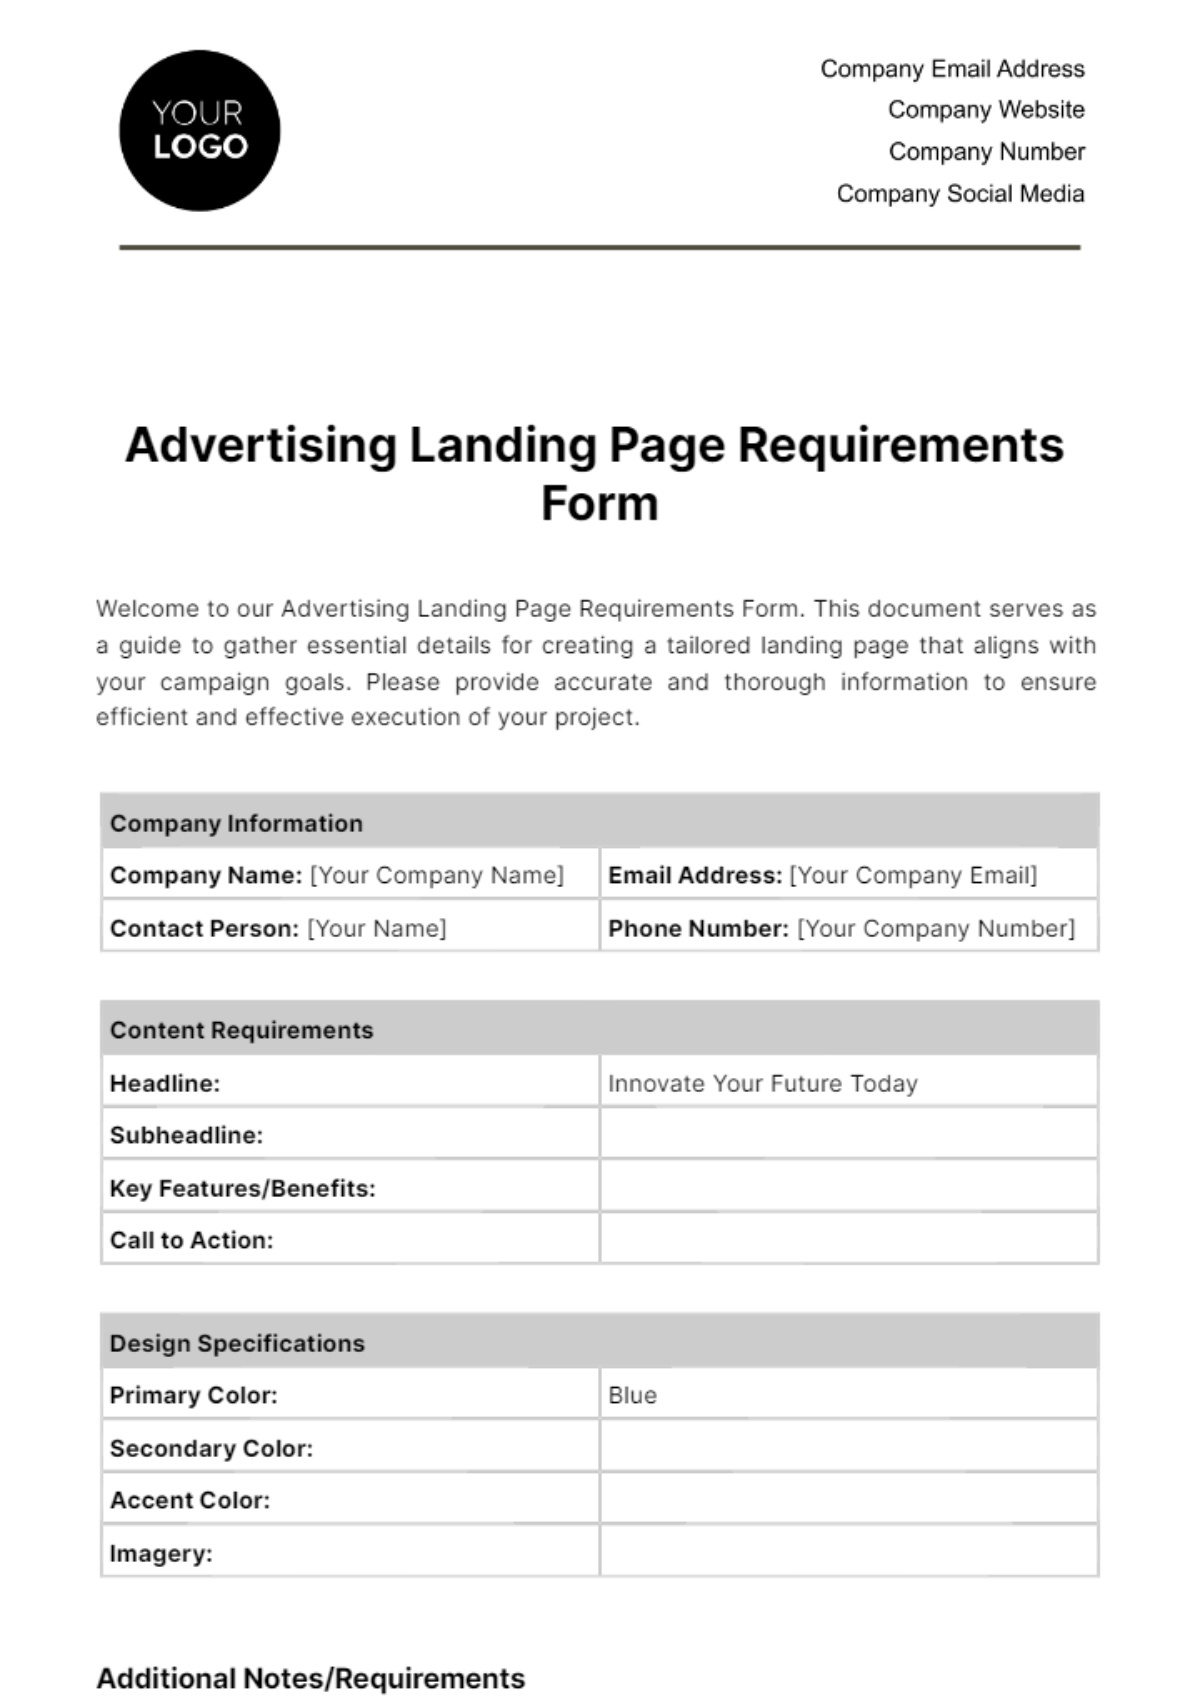 Advertising Landing Page Requirements Form Template